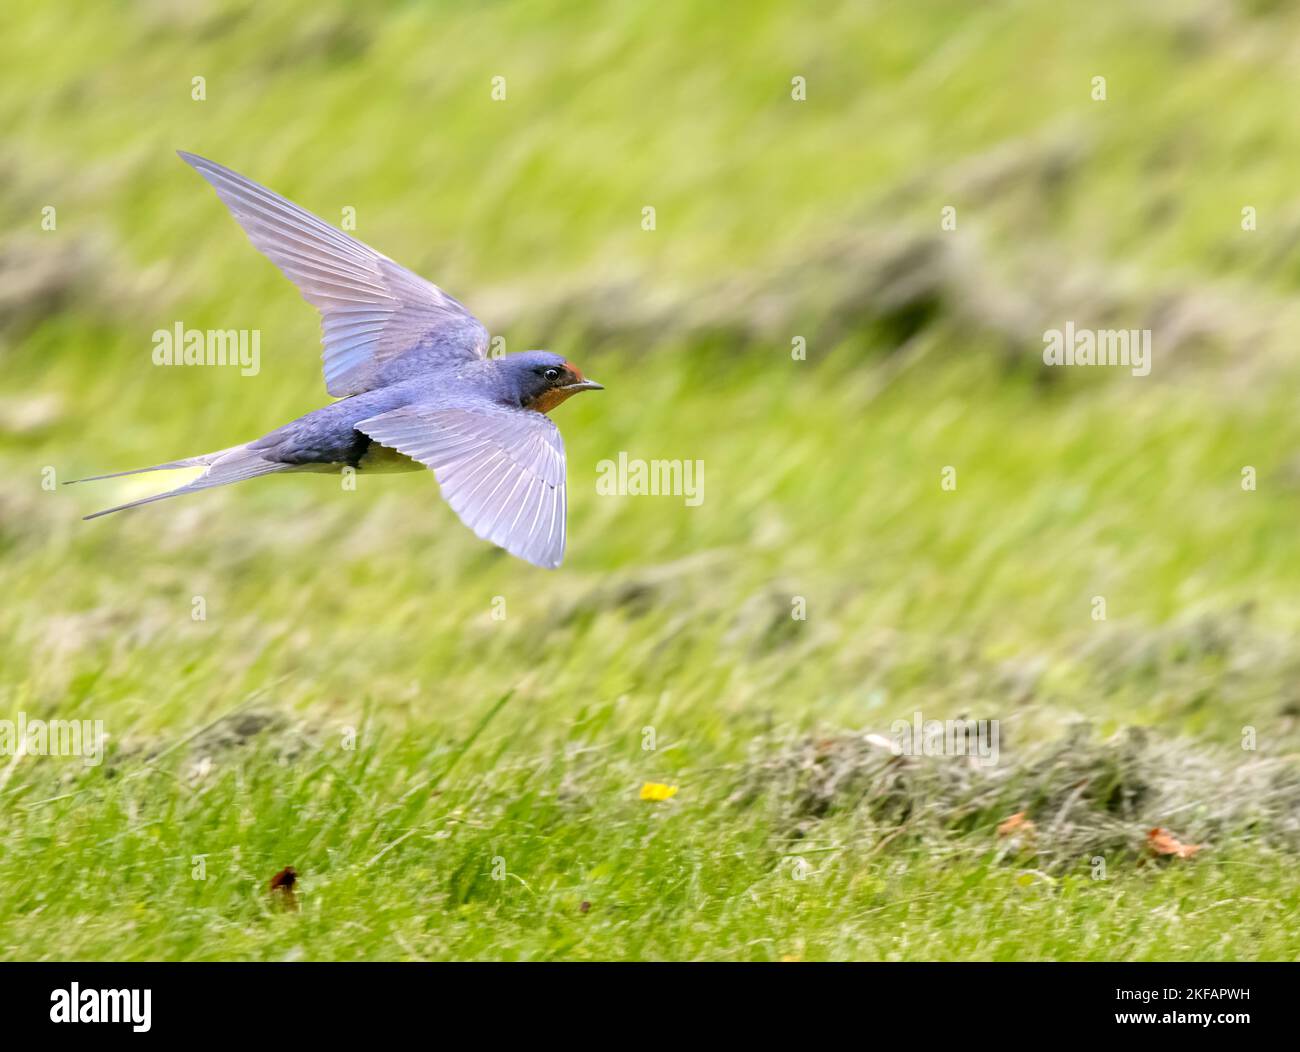 Barn swallow over grass Stock Photo